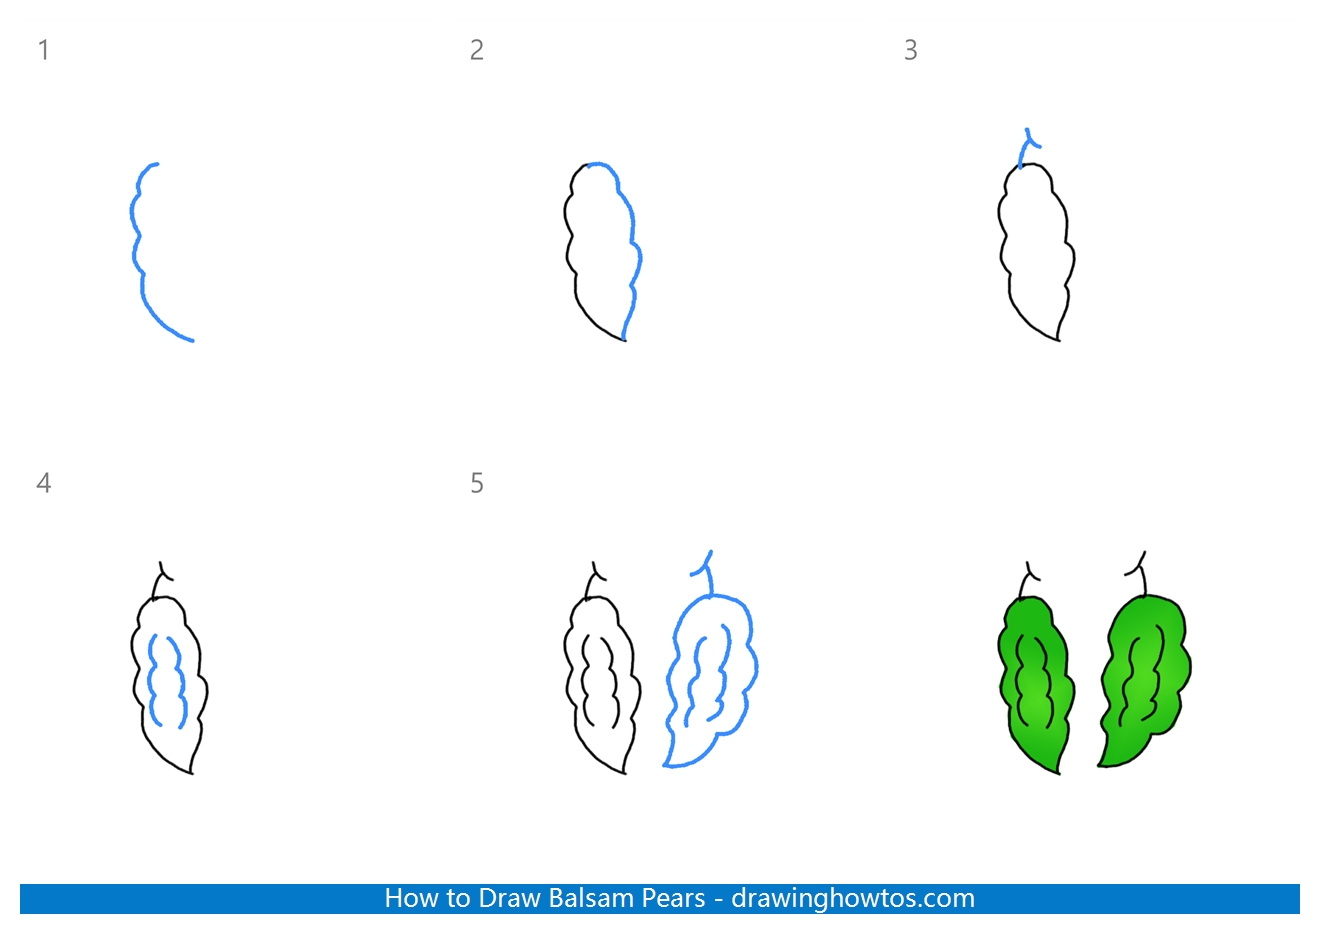 How to Draw Balsam Pears Step by Step